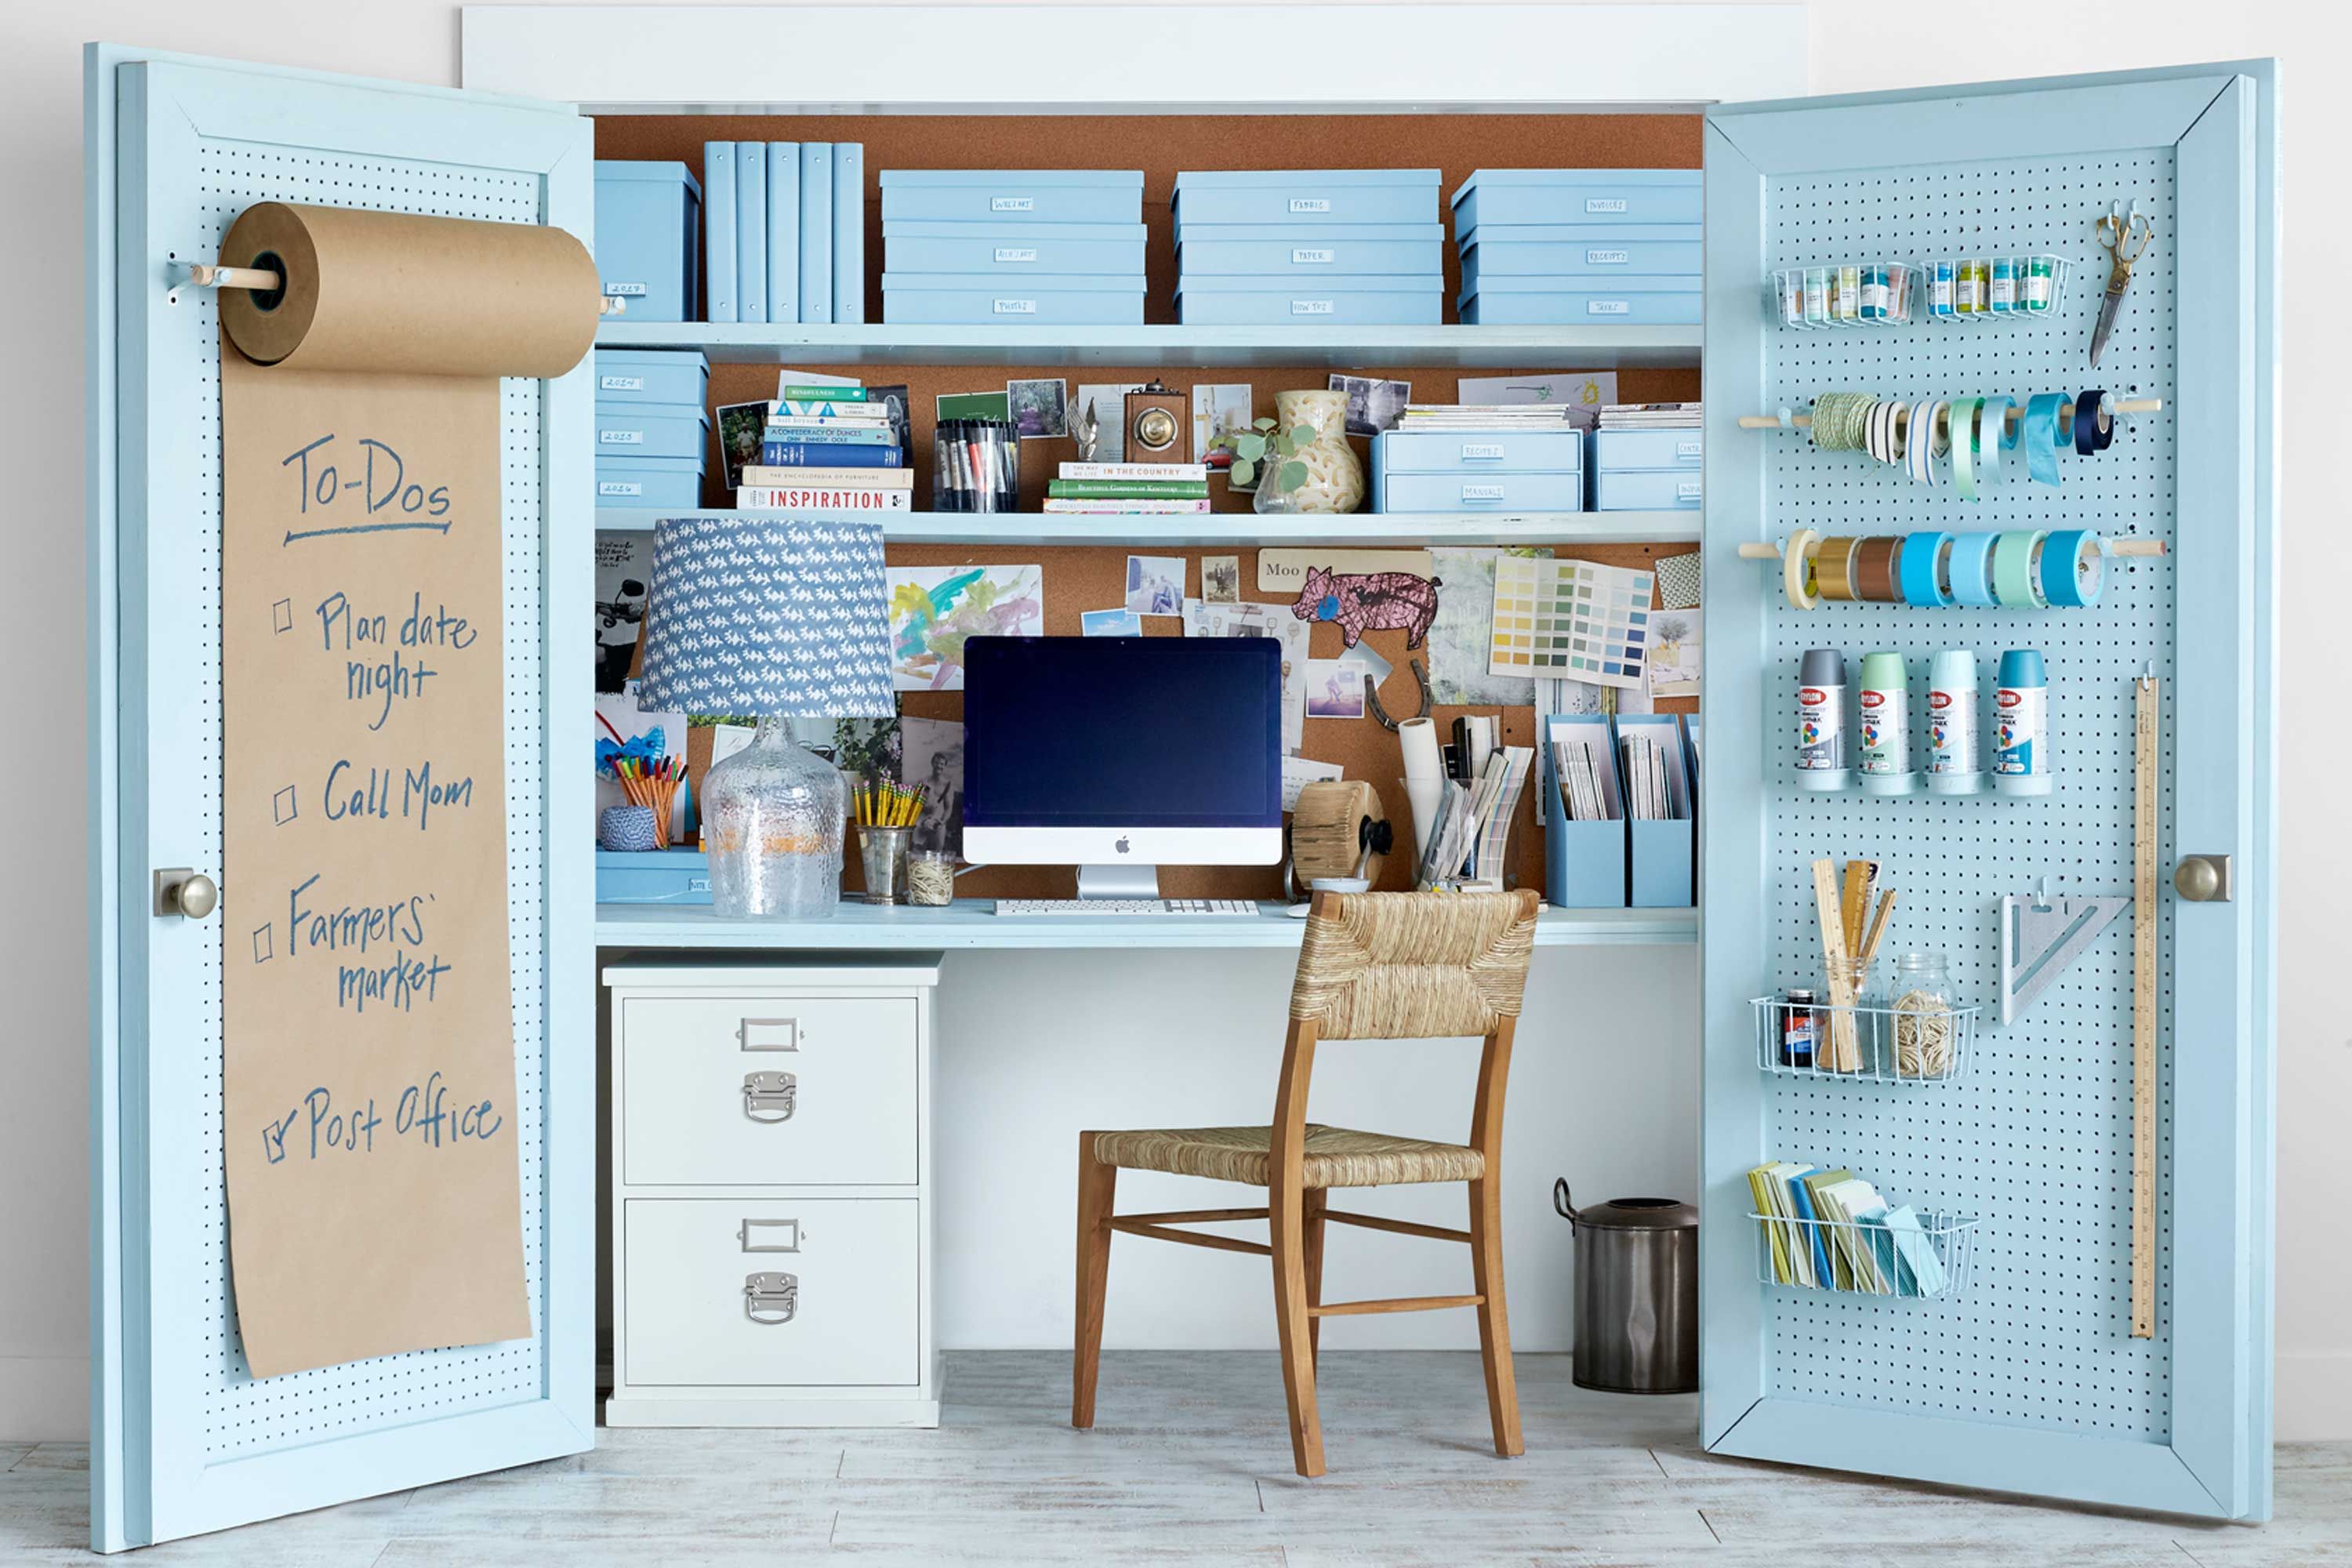 68 Smart Ideas for Organizing Small Spaces - Storage Ideas for